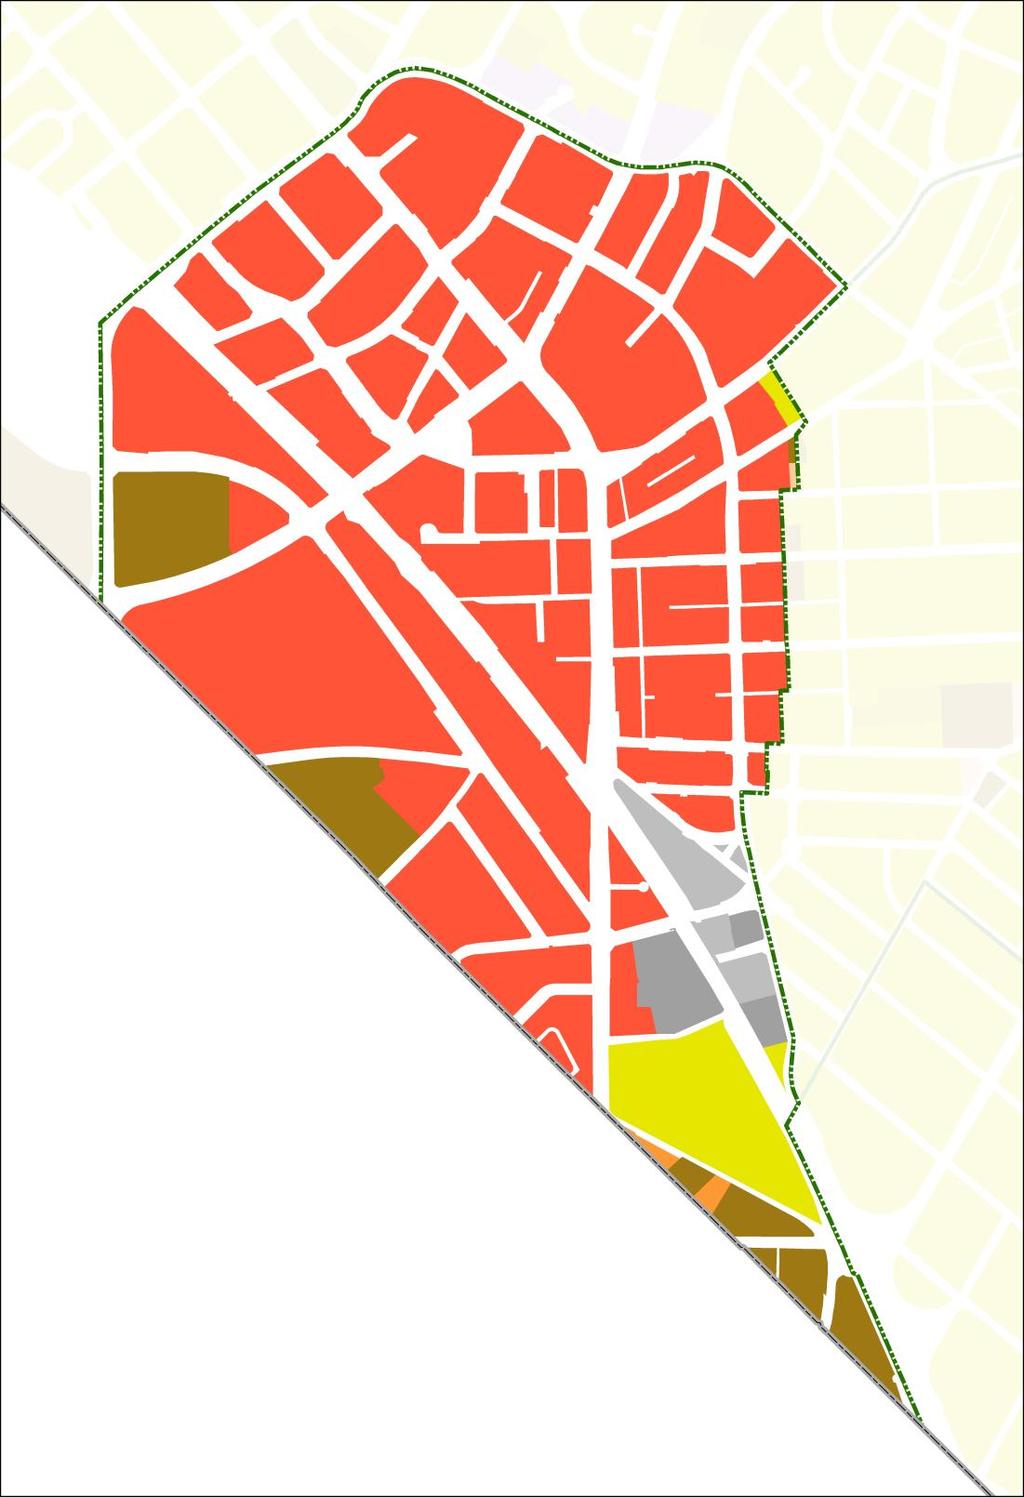 PROPOSED ZONING MAP Proposed Zones Residential Medium Density R-60 Multi-Family R-20 R-10 Comm/Res-